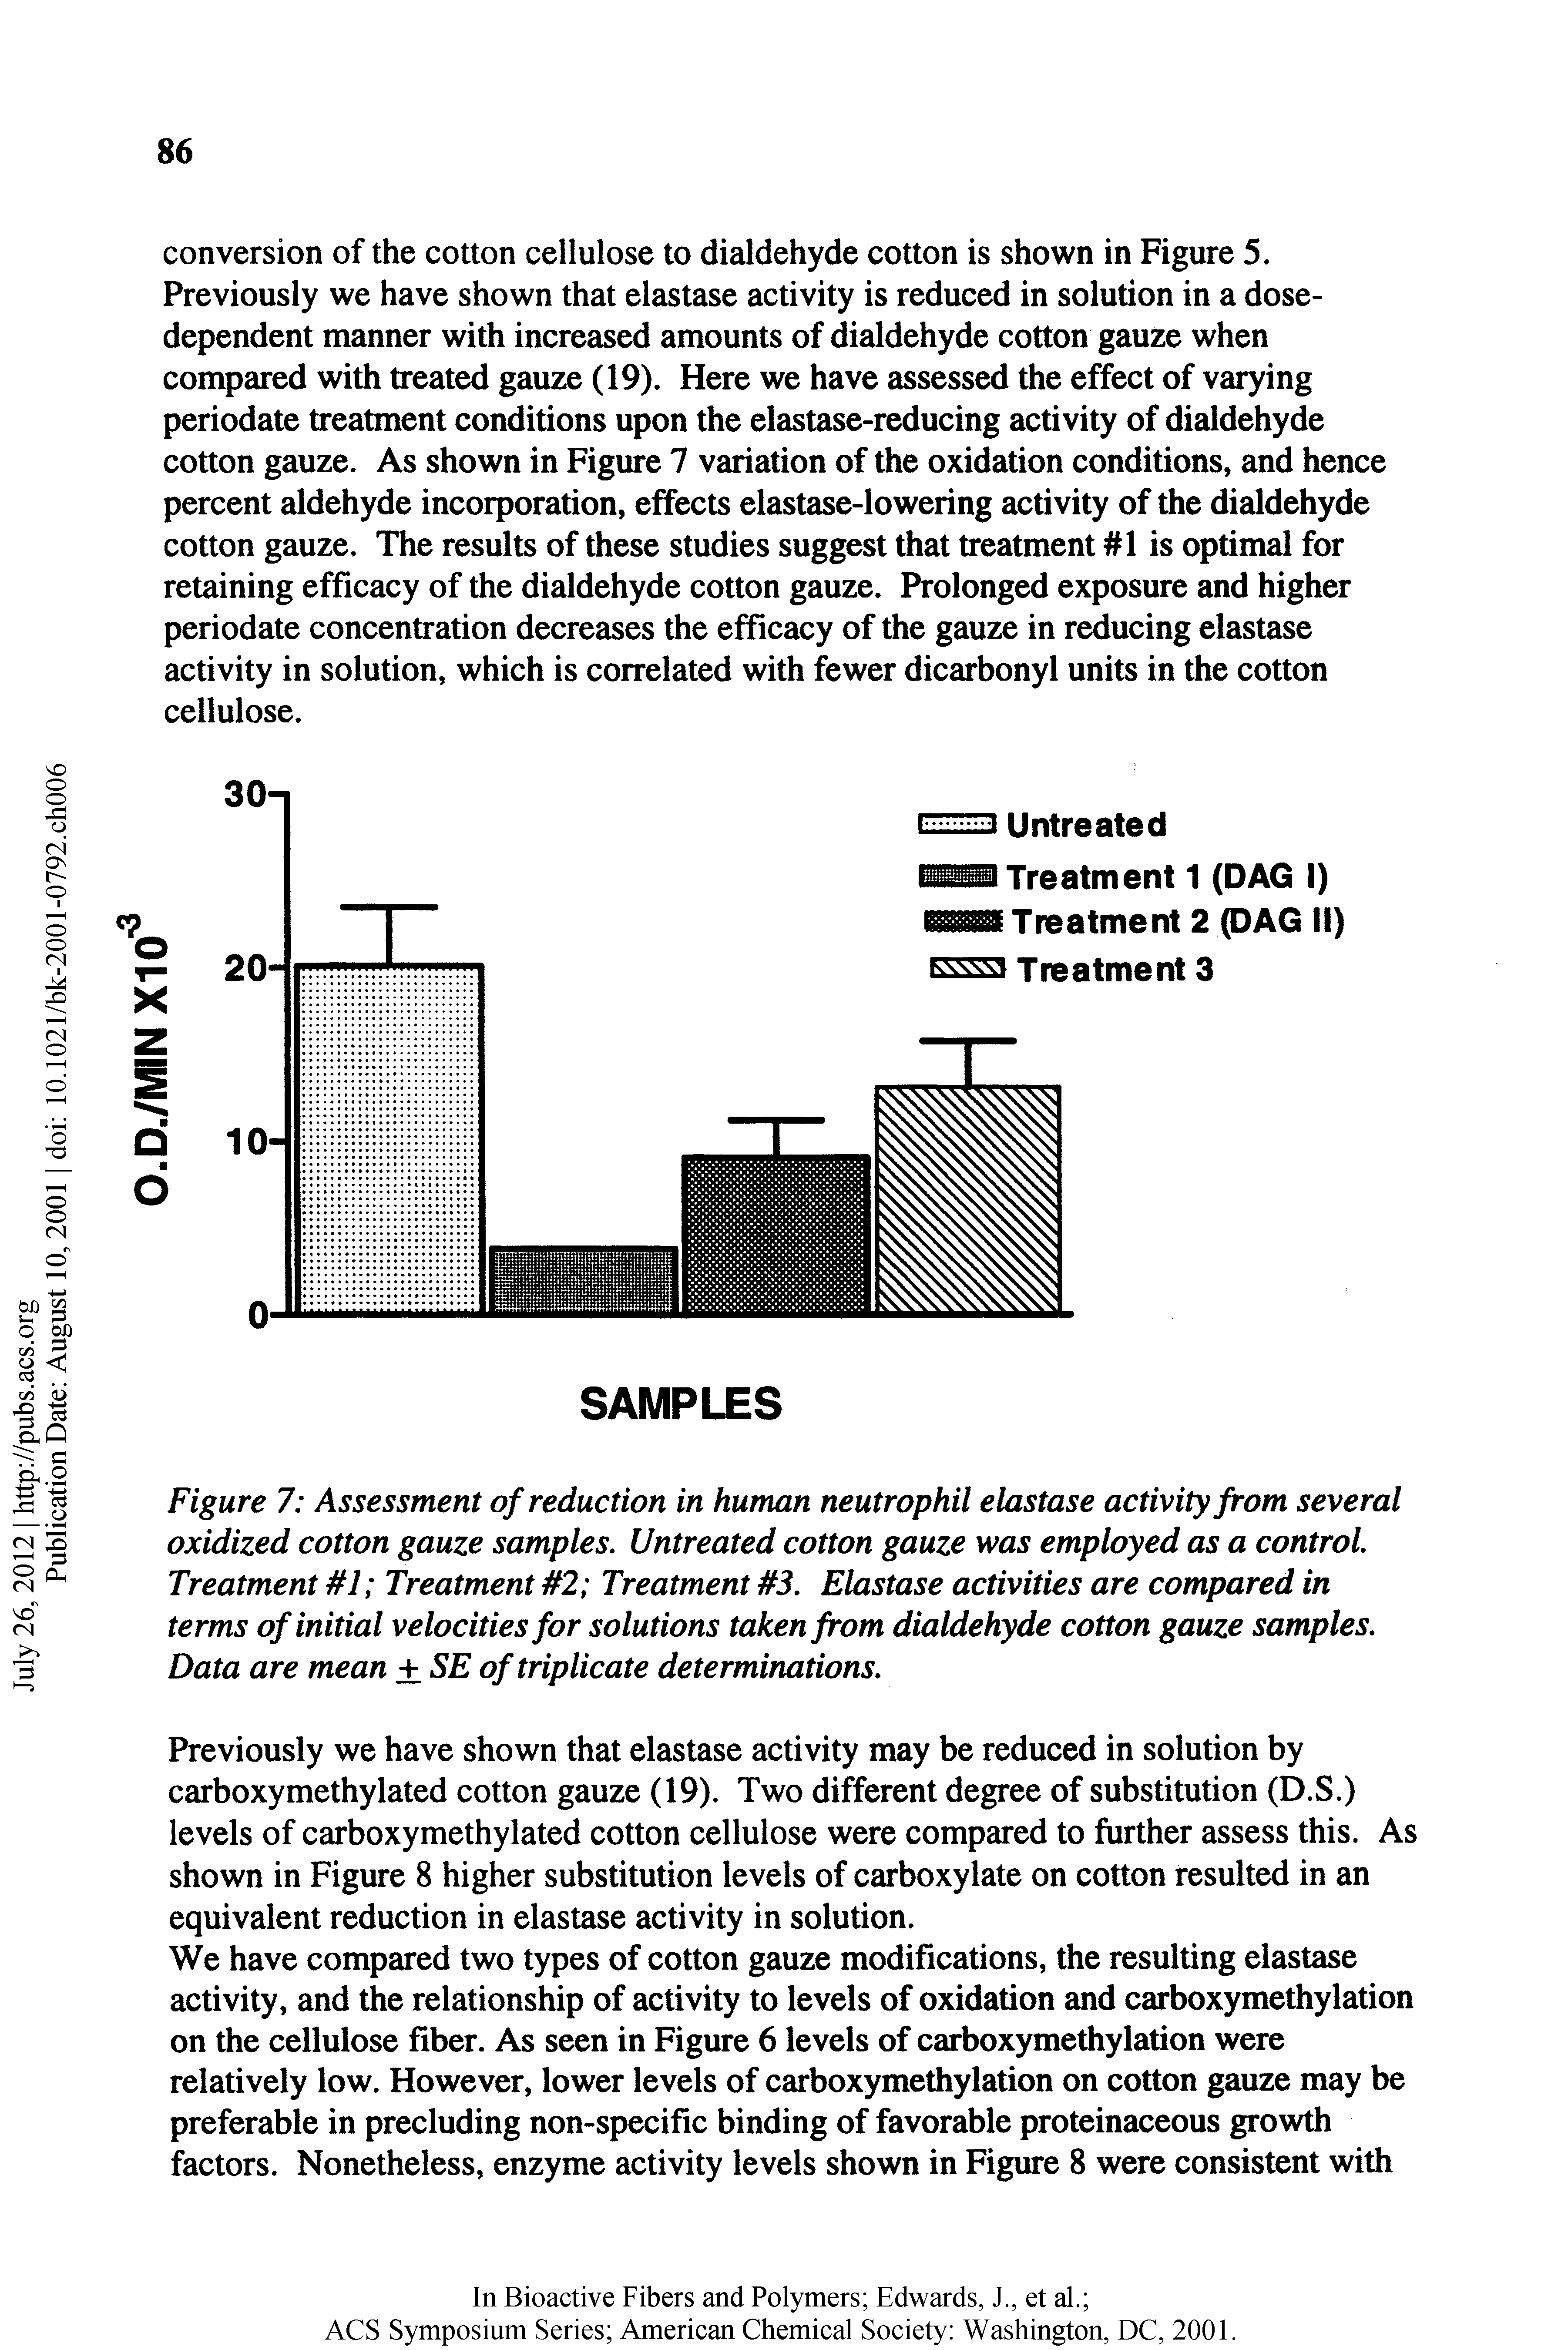 Figure 7 Assessment of reduction in human neutrophil elastase activity from several oxidized cotton gauze samples. Untreated cotton gauze was employed as a control Treatment 7 Treatment 2 Treatment 3. Elastase activities are compared in terms of initial velocities for solutions taken from dialdehyde cotton gauze samples. Data are mean + SE of triplicate determinations.